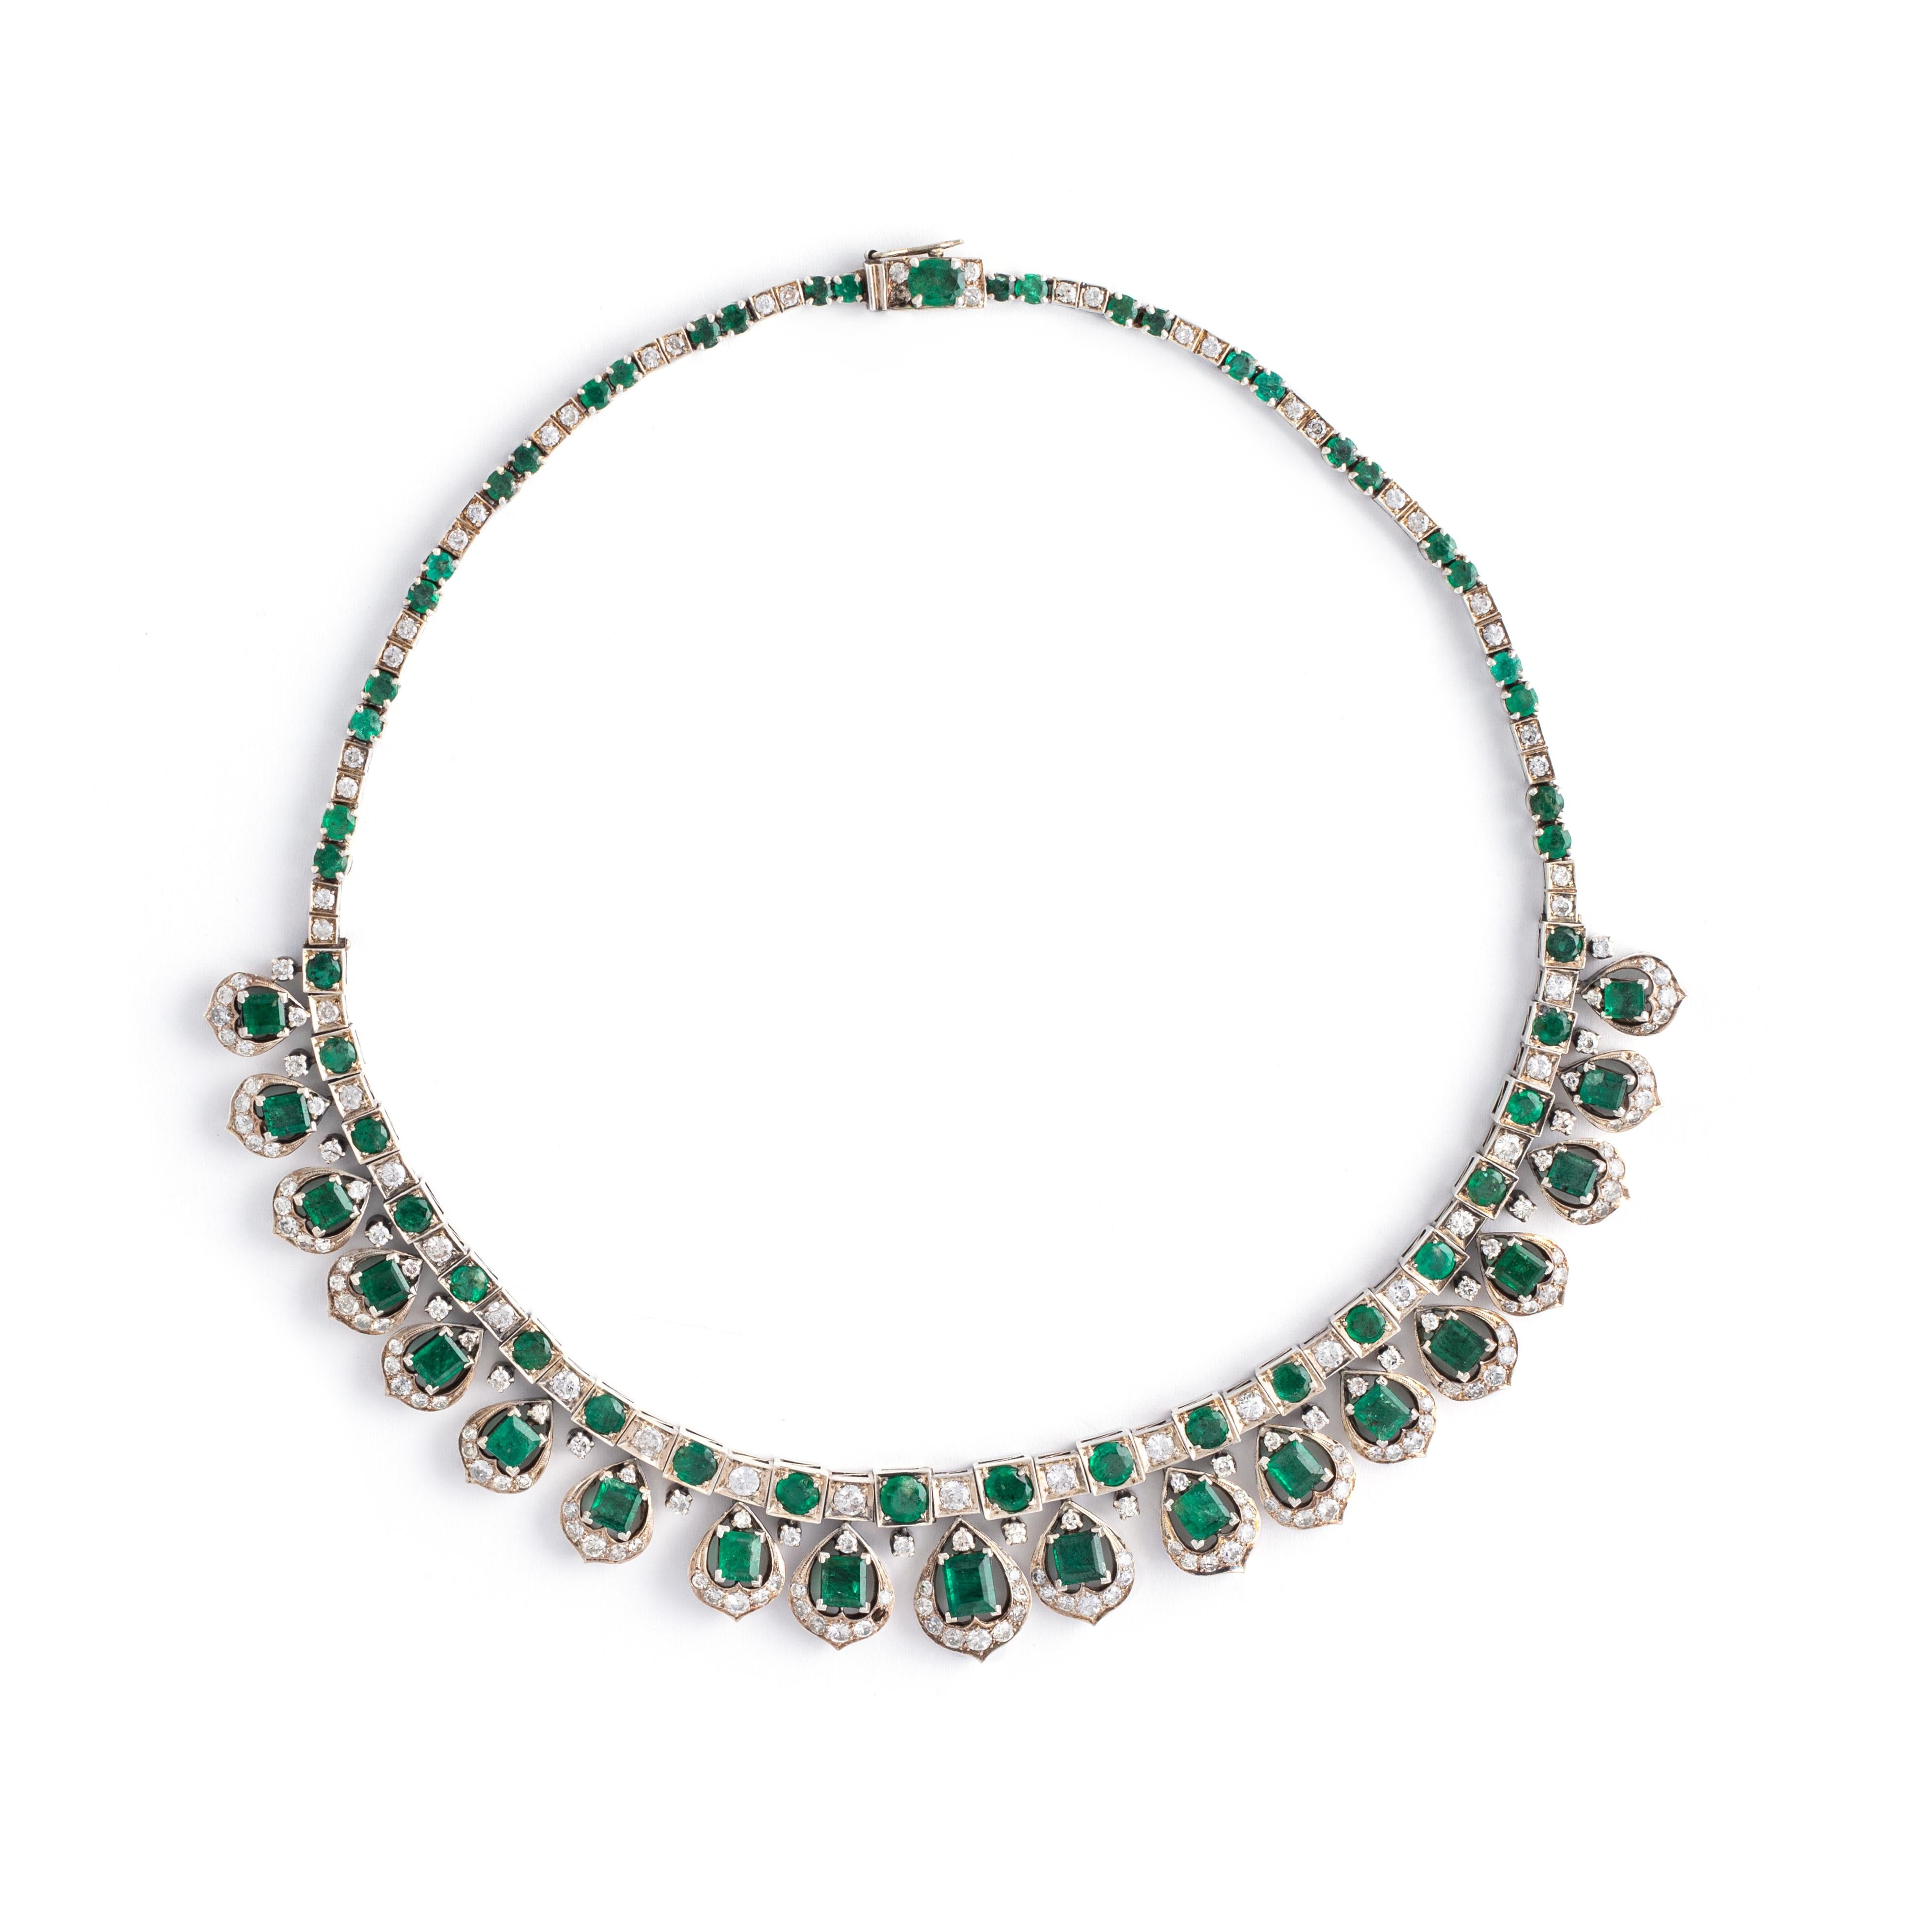 Emerald and Diamond White Gold Necklace

Total Emerald weight: estimated to be 14.14 carats
Total Diamond weight: estimated to be 7.80 carats
